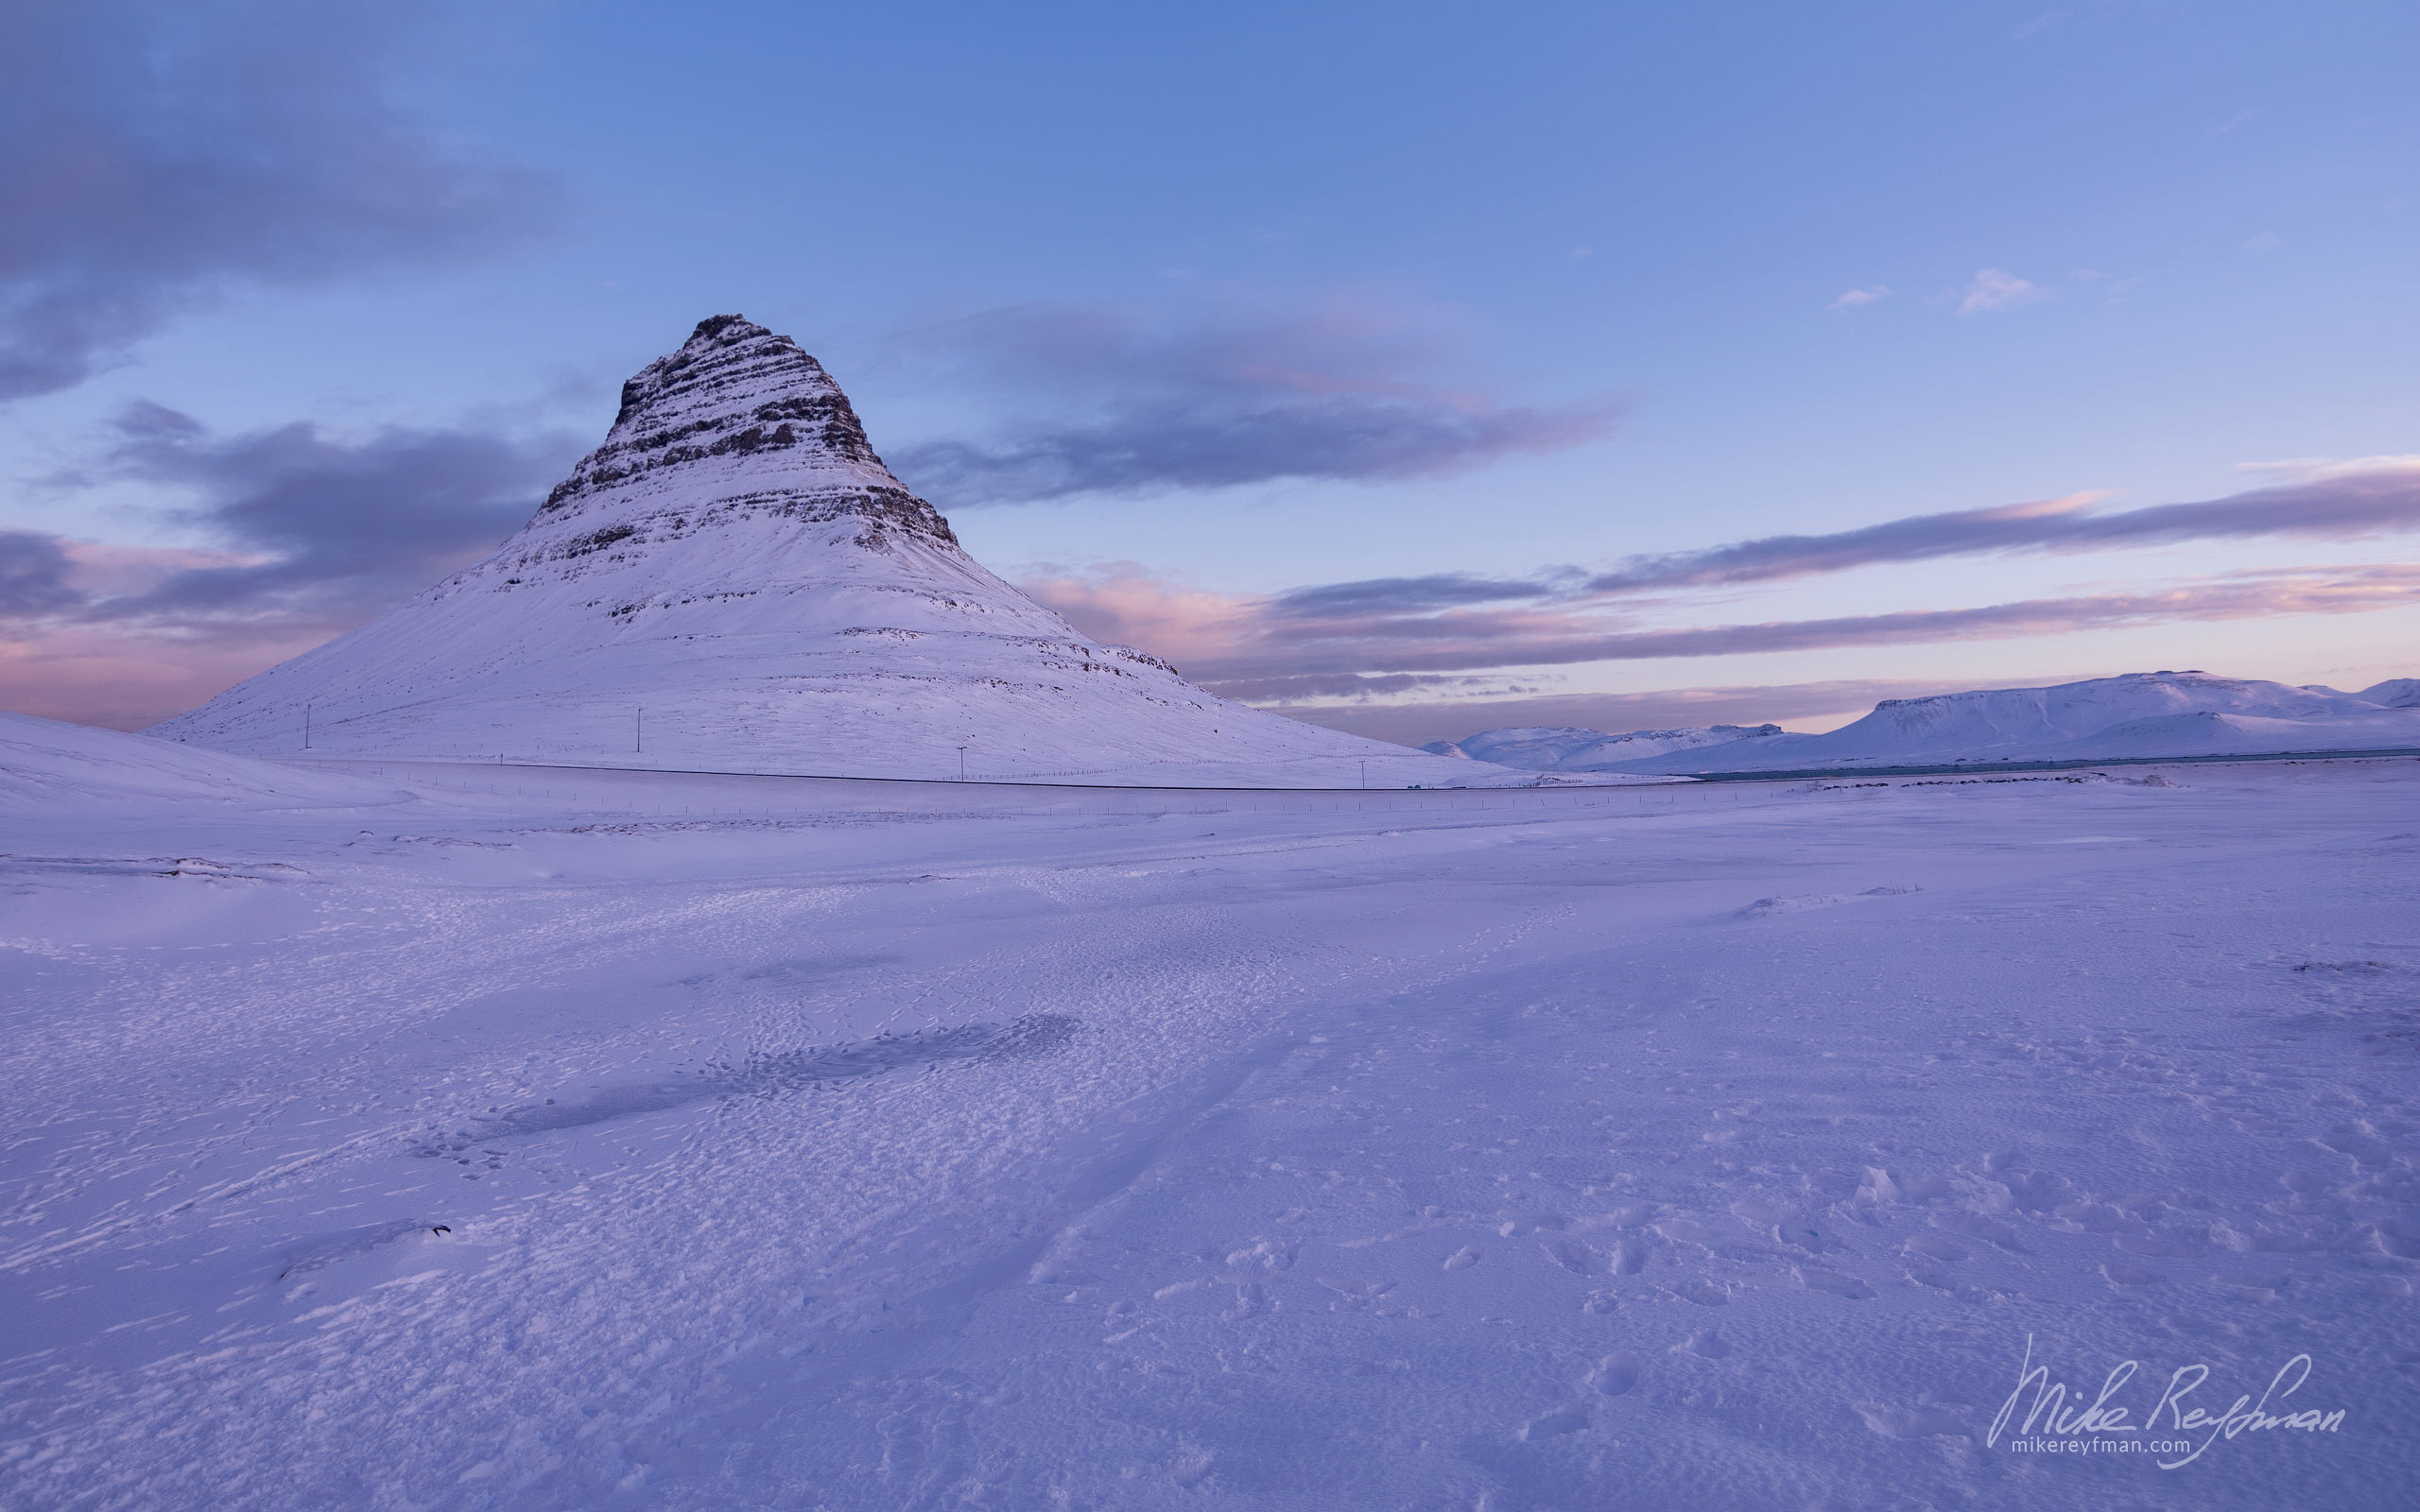 Kirkjufell Mountain in winter. Grundarfjörður, Snaefellsness Peninsula, Iceland 113-IC-GP _DSC6434 - Rhyolite Mountains, Crater Lakes, Geothermal Areas, Lava Fields and Glacial Rivers. Iceland.  - Mike Reyfman Photography